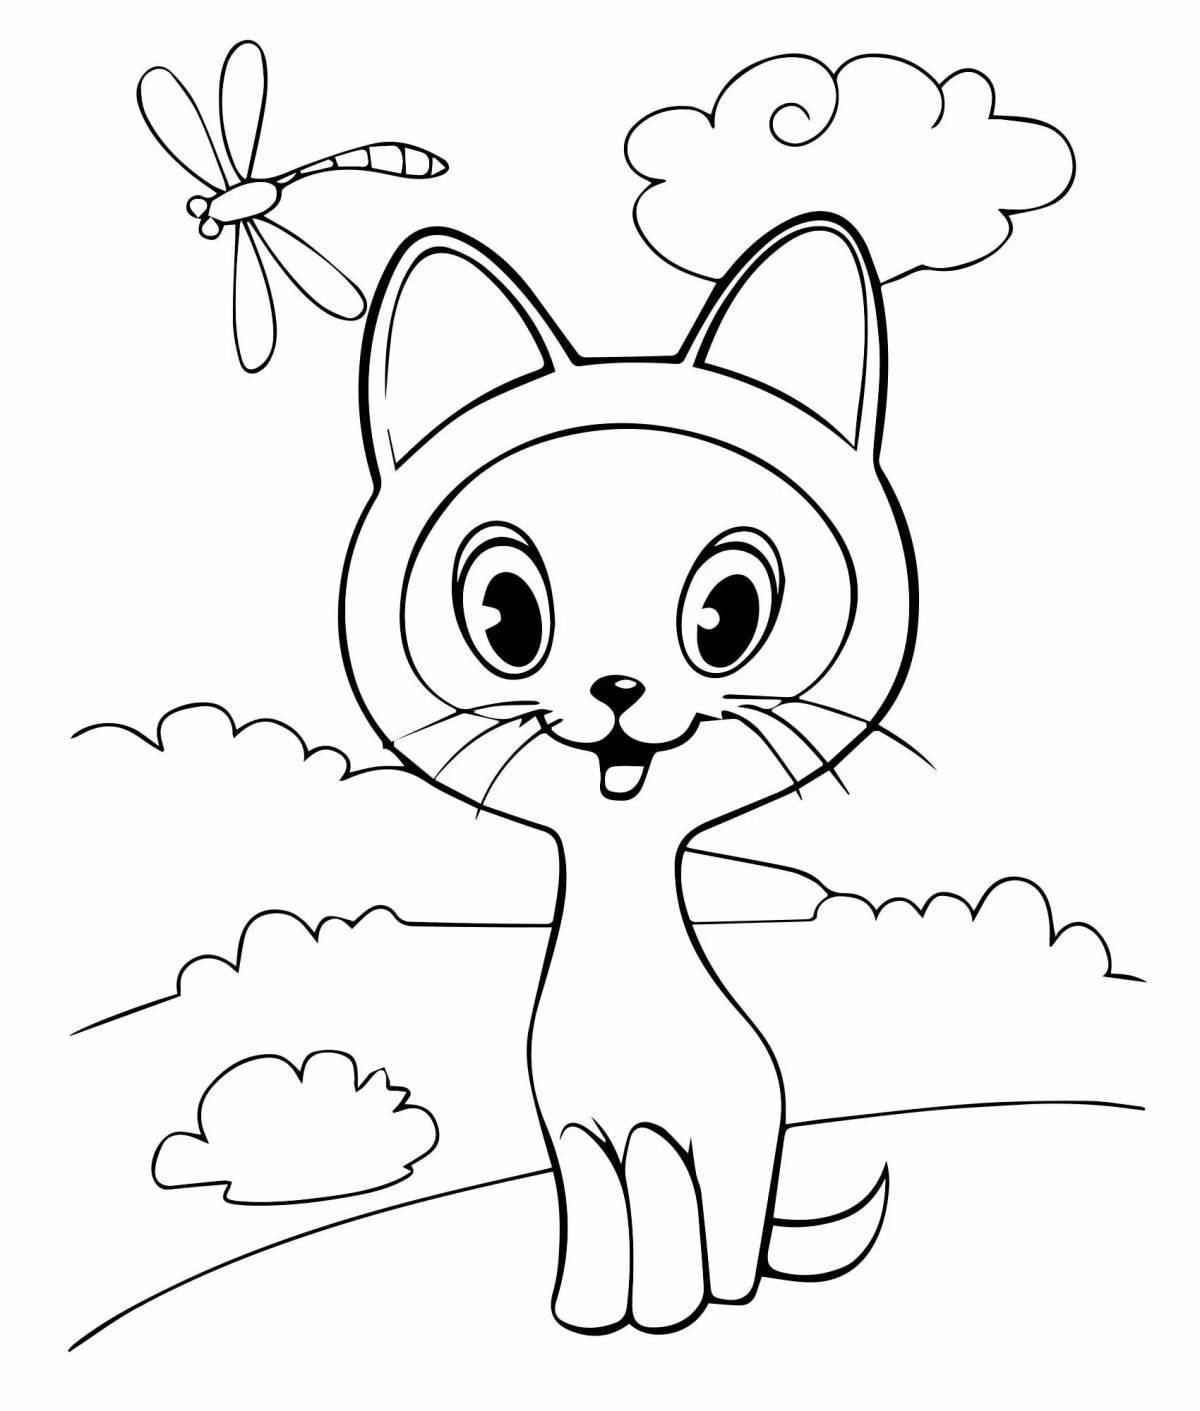 Adorable kitten drawing for kids